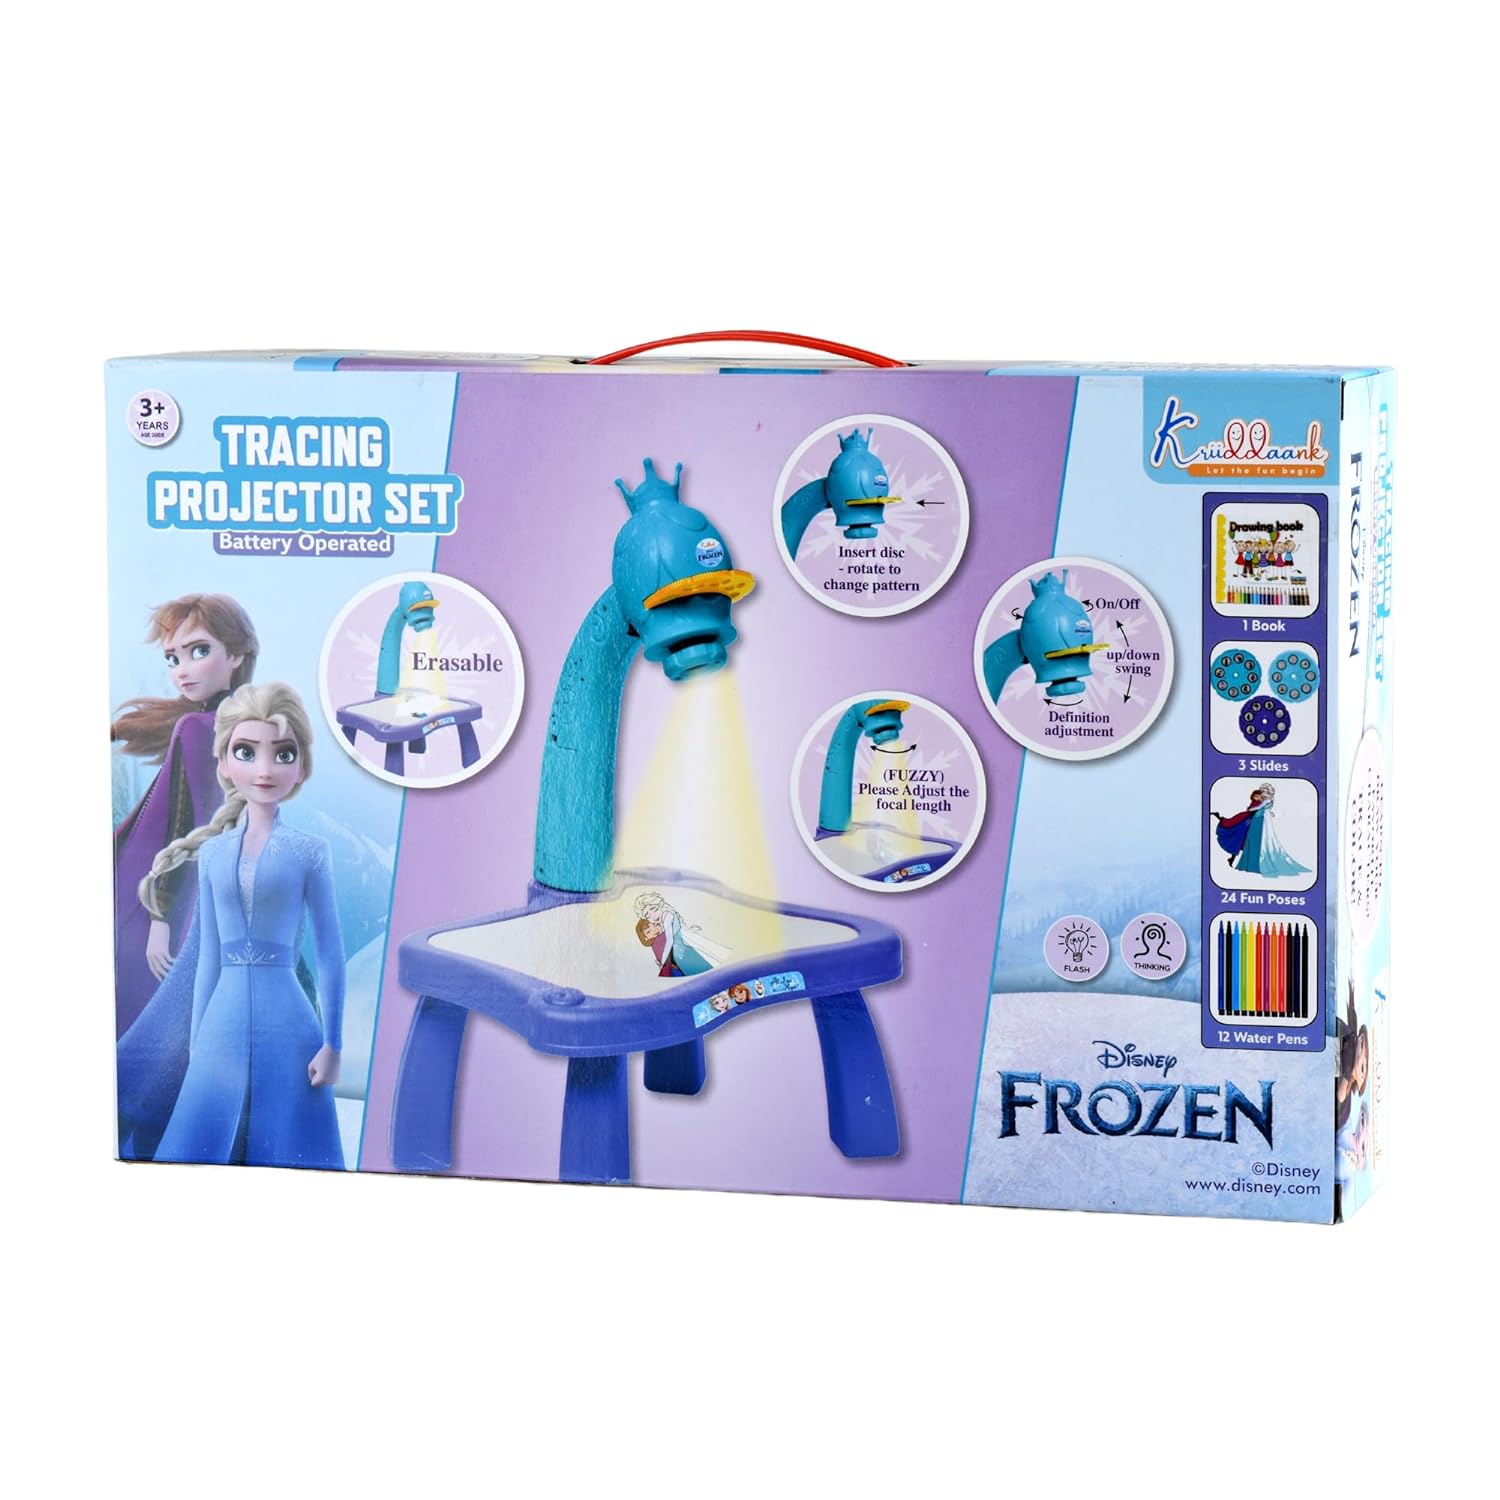 Disney Frozen Drawing Kids Projector Set Painting Desk Table with Patterns & Colorful Water Pens Table Lamp for Better Creativity & Education Board Game for Kids